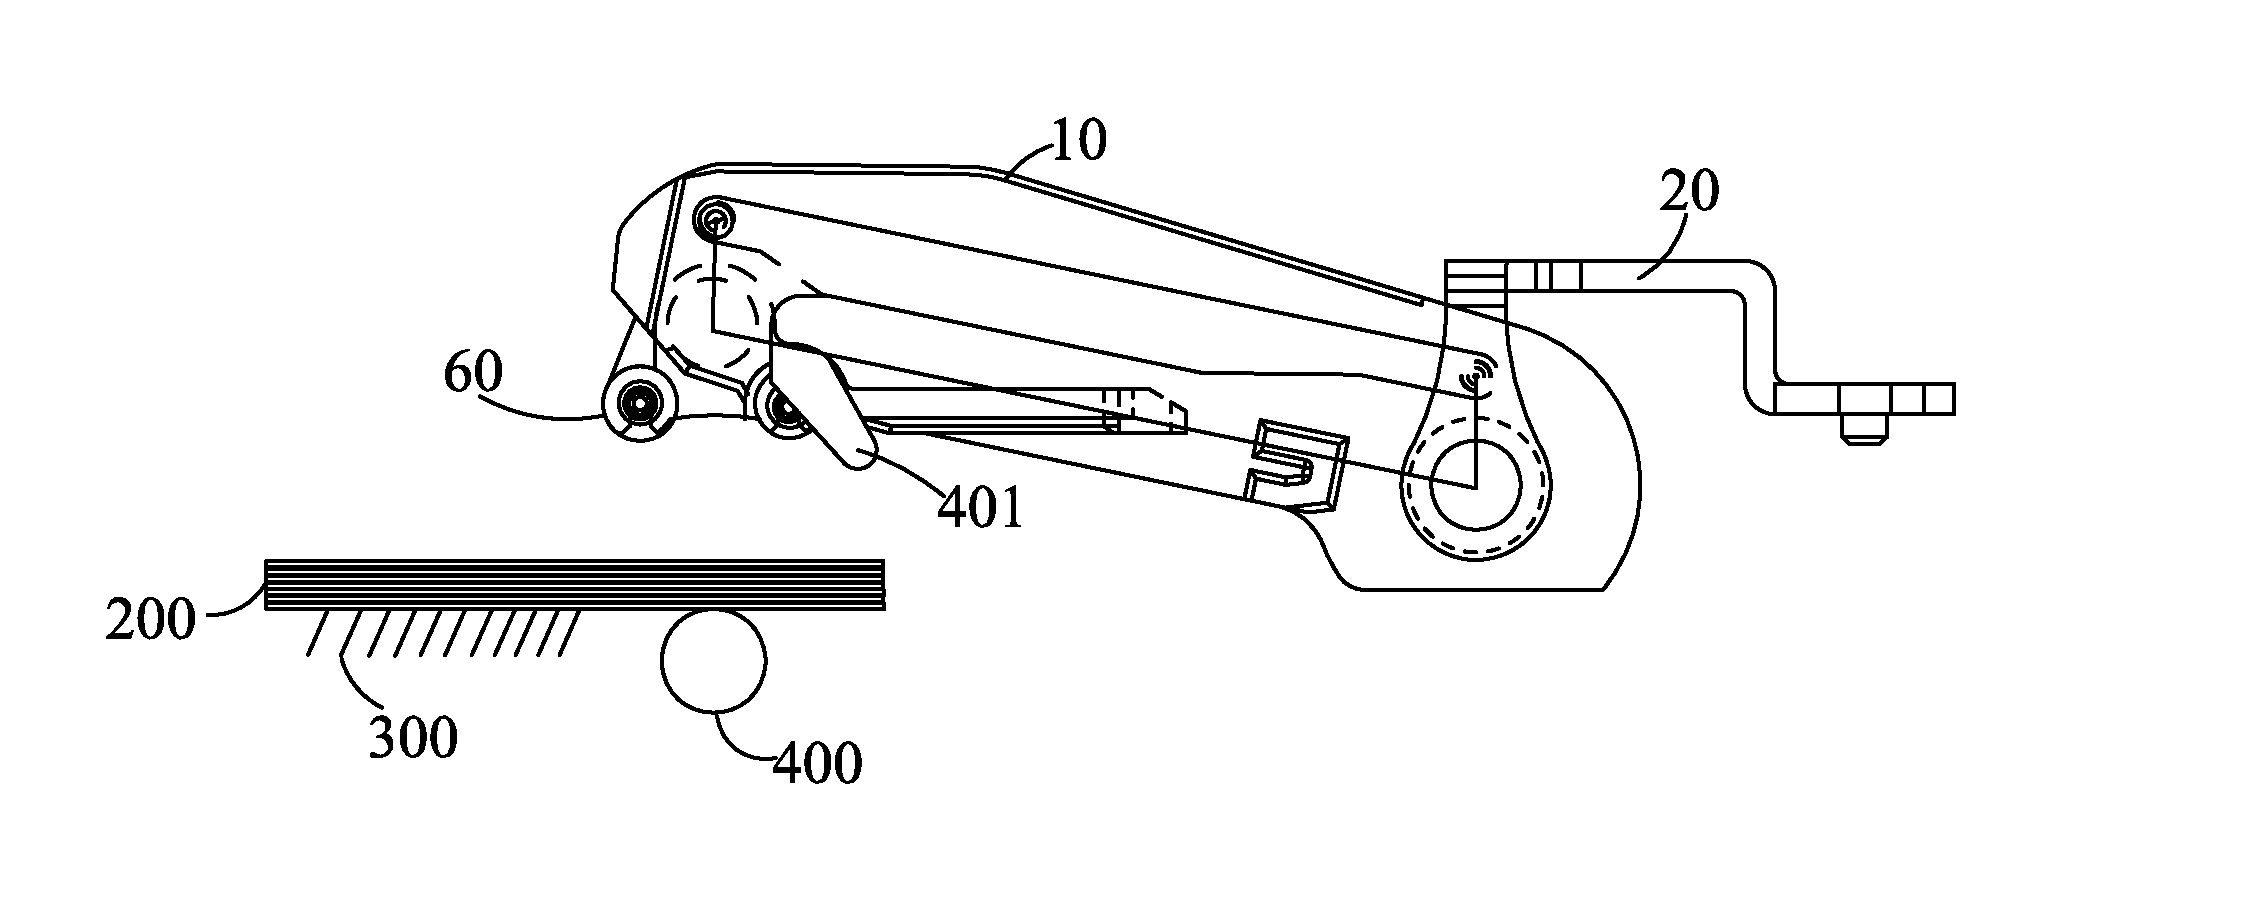 Sheet pressing apparatus with sensor unit and stepping motor